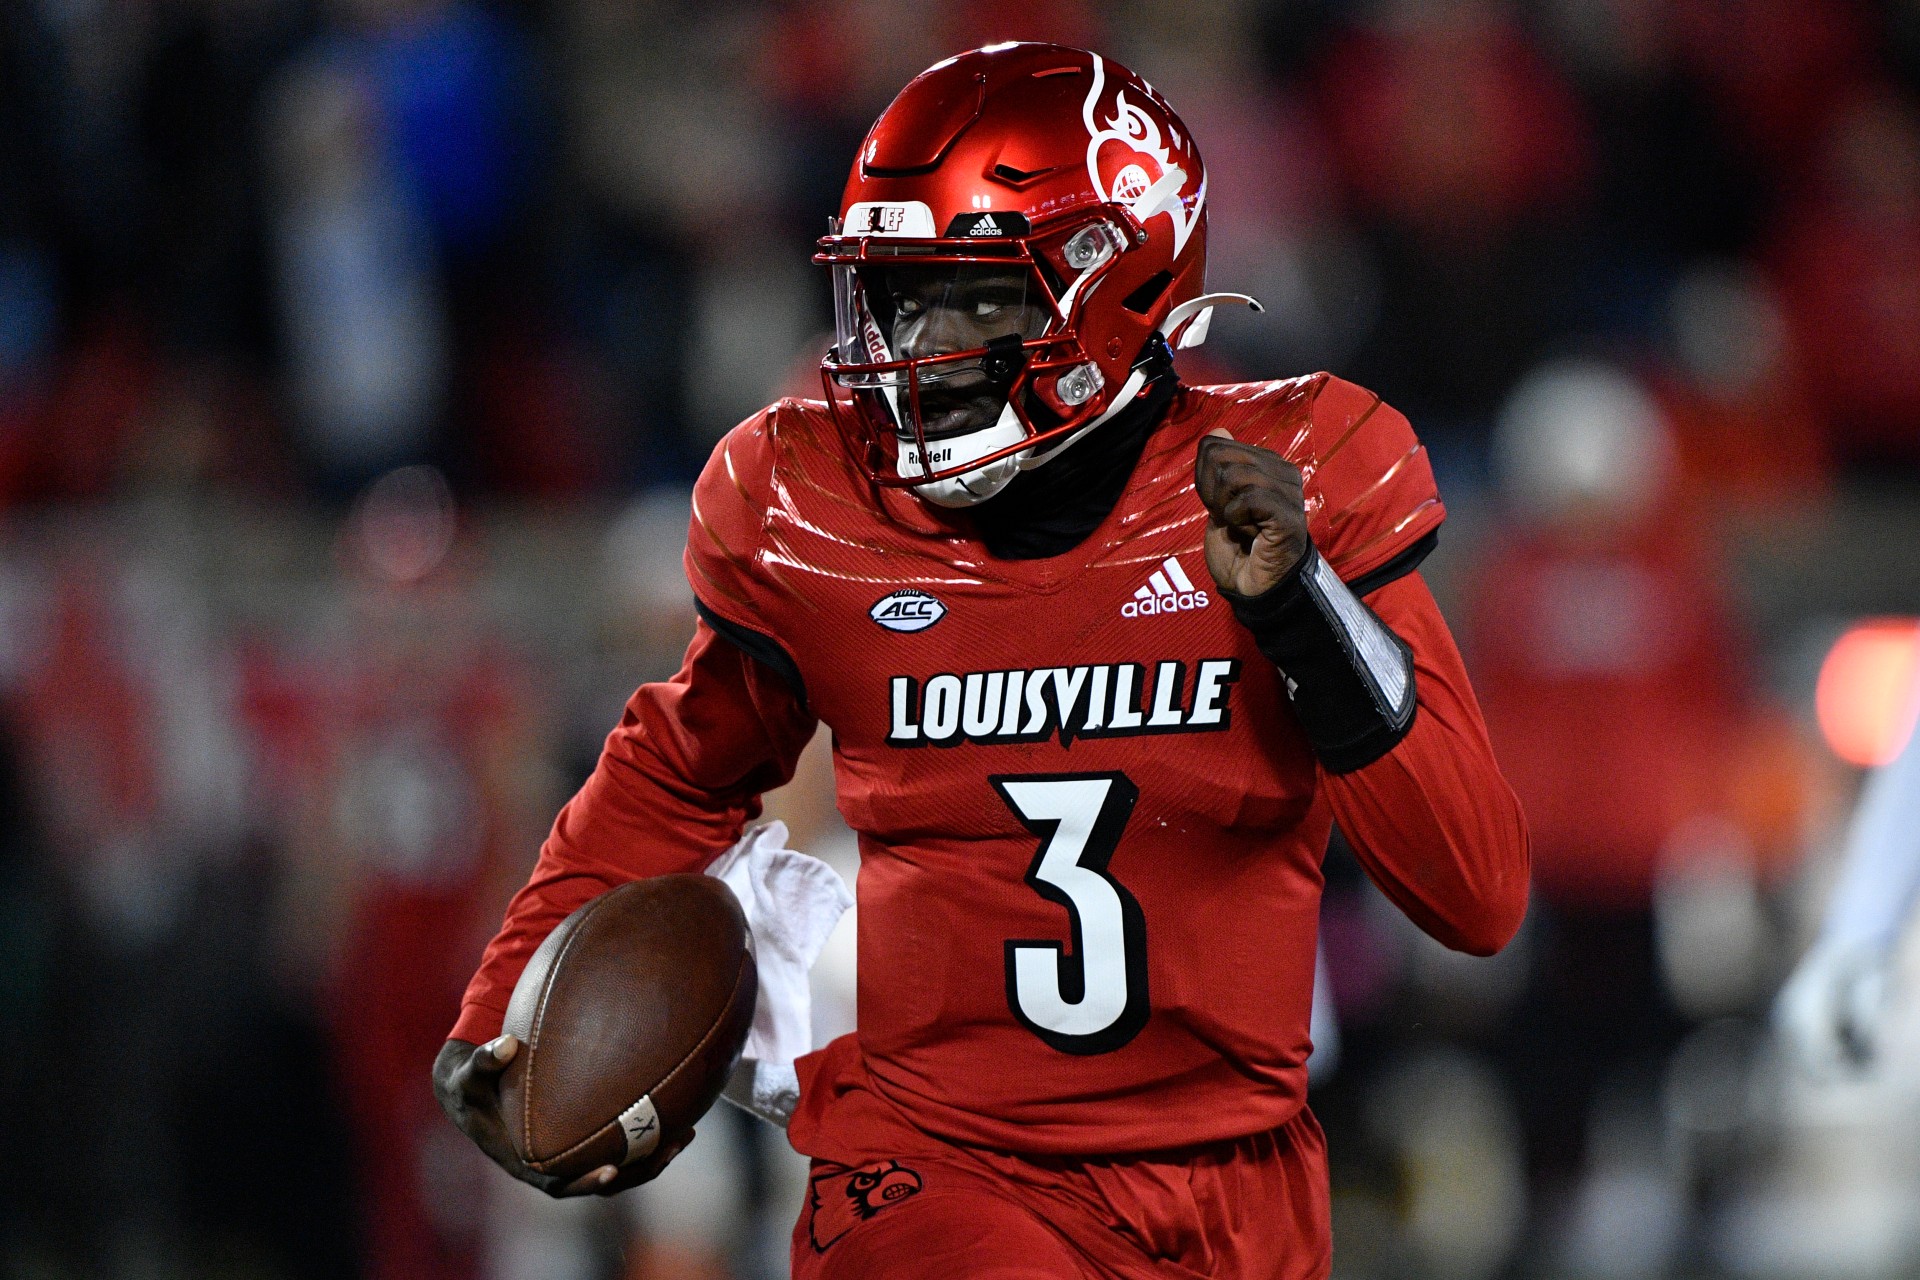 Get Up To A 100% Boost at DraftKings For FSU-Louisville on Friday